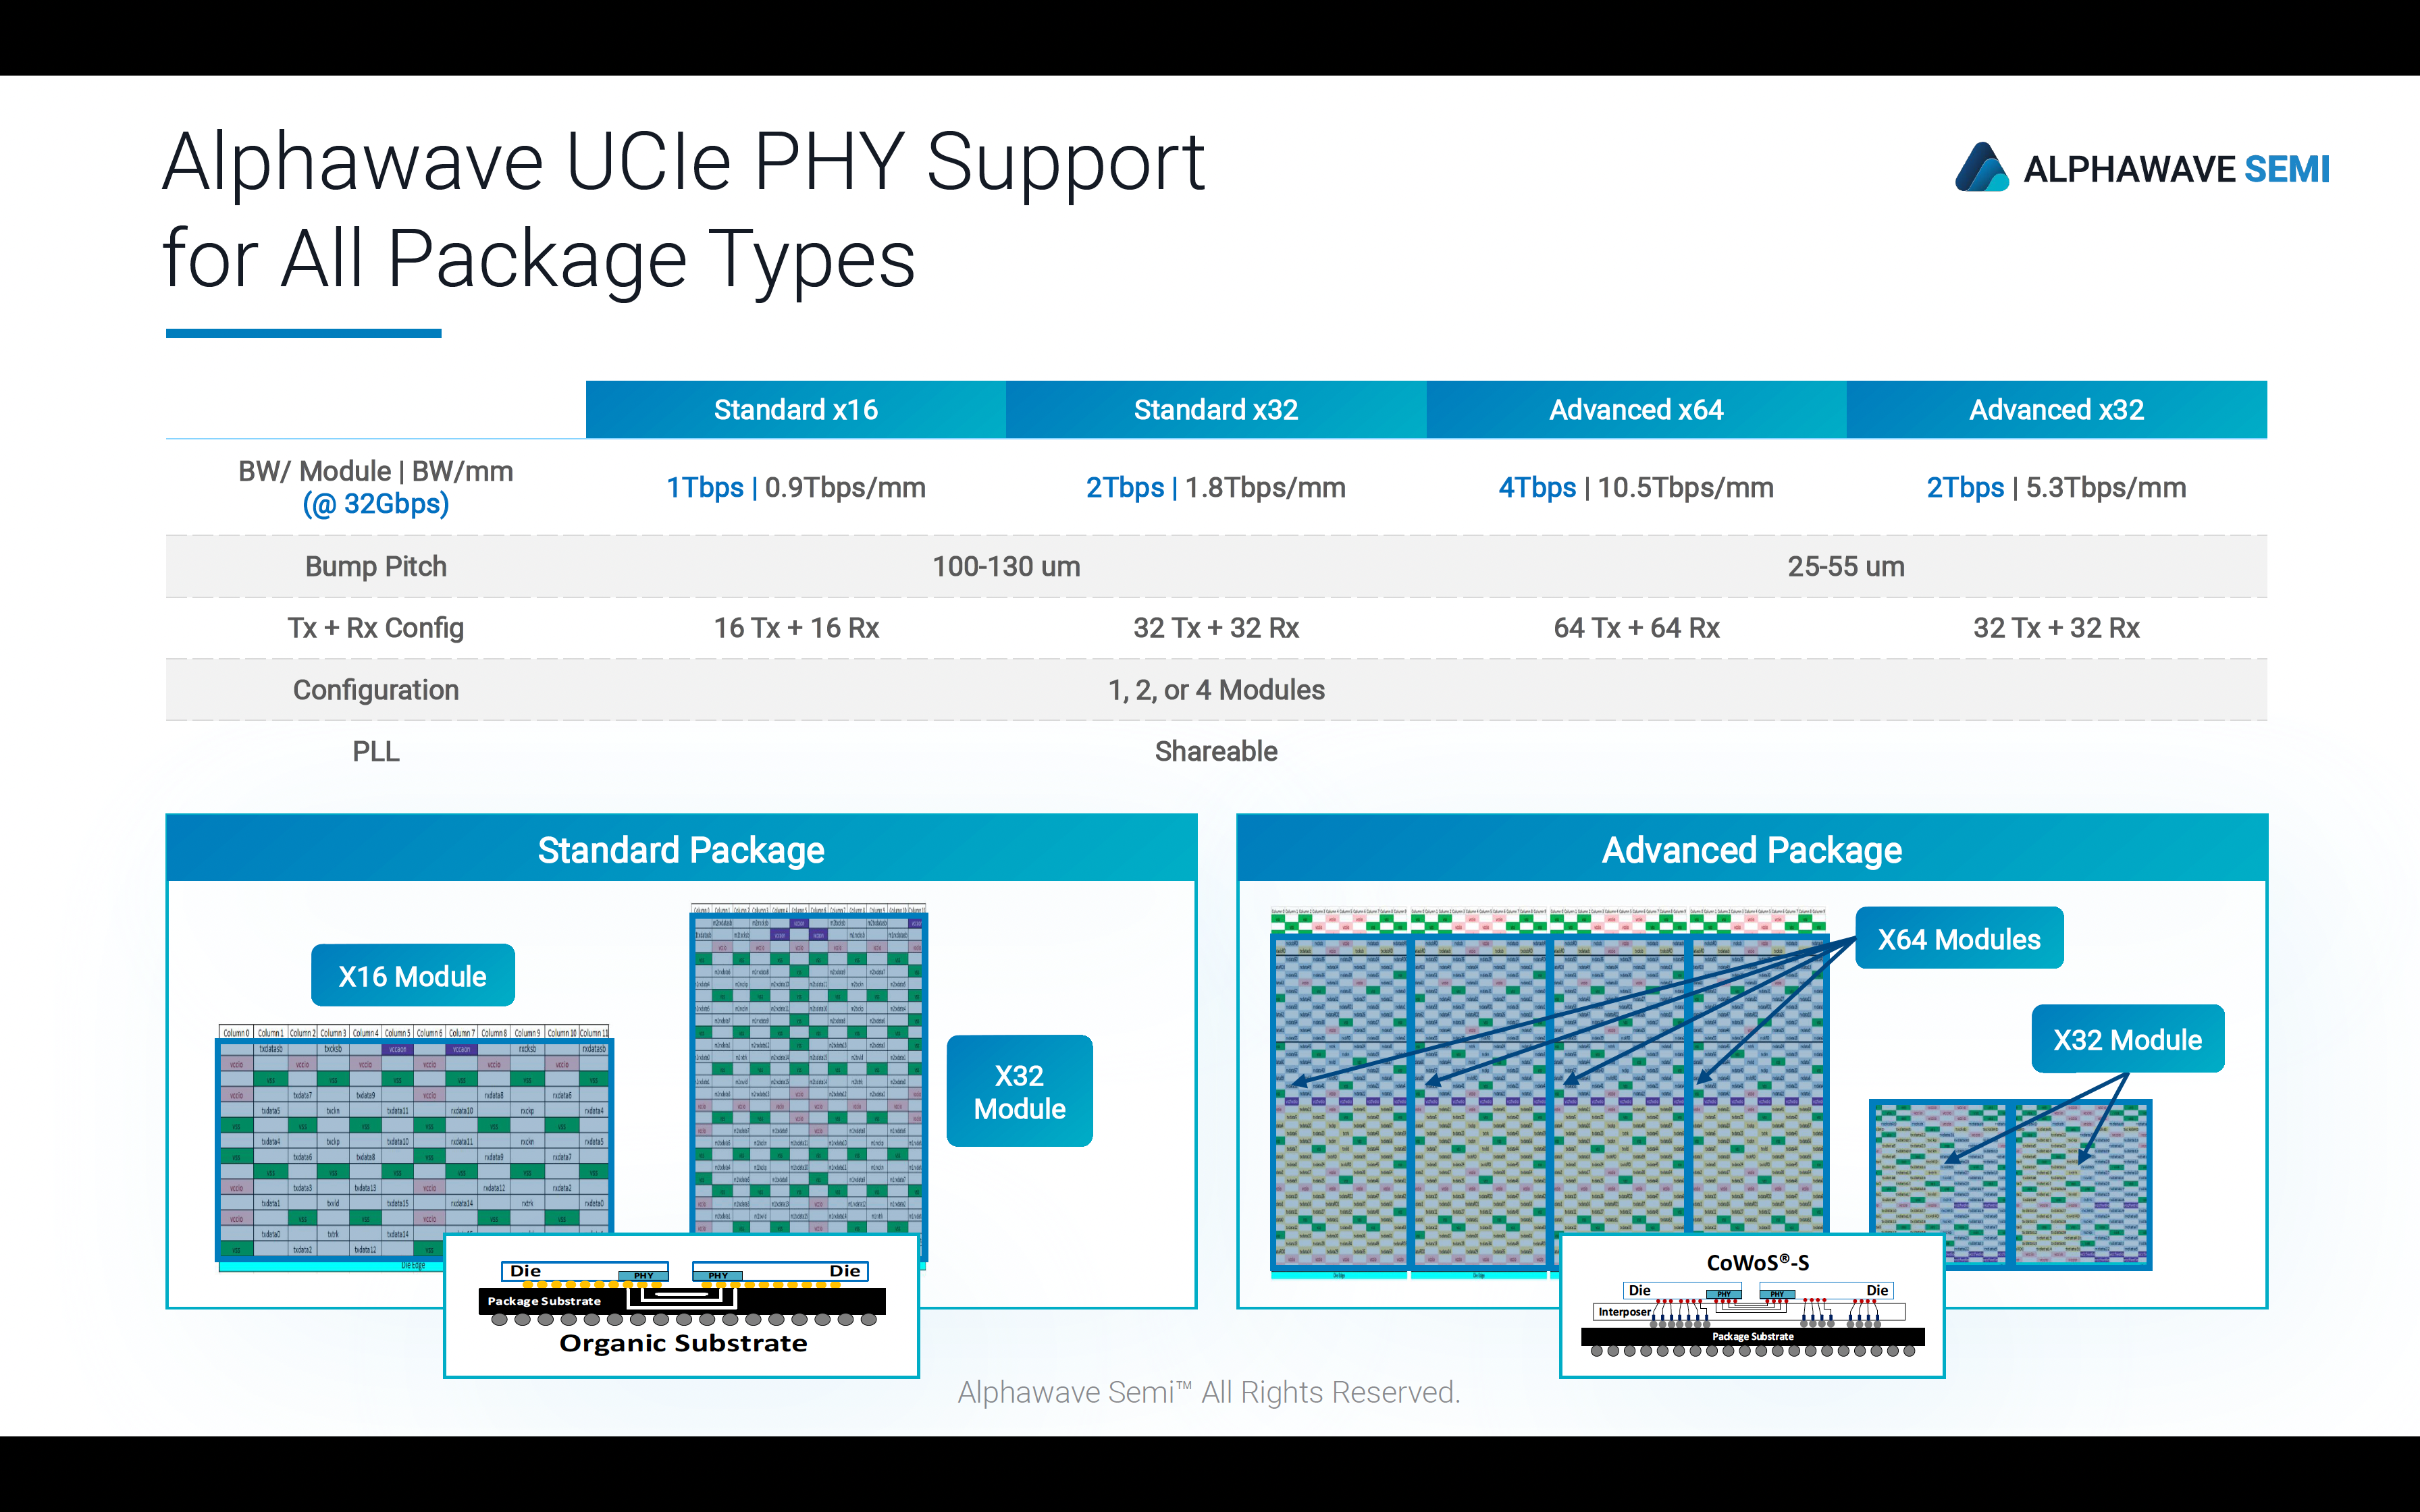 Alphwave Semi UCIe PHY Support for All Package Types